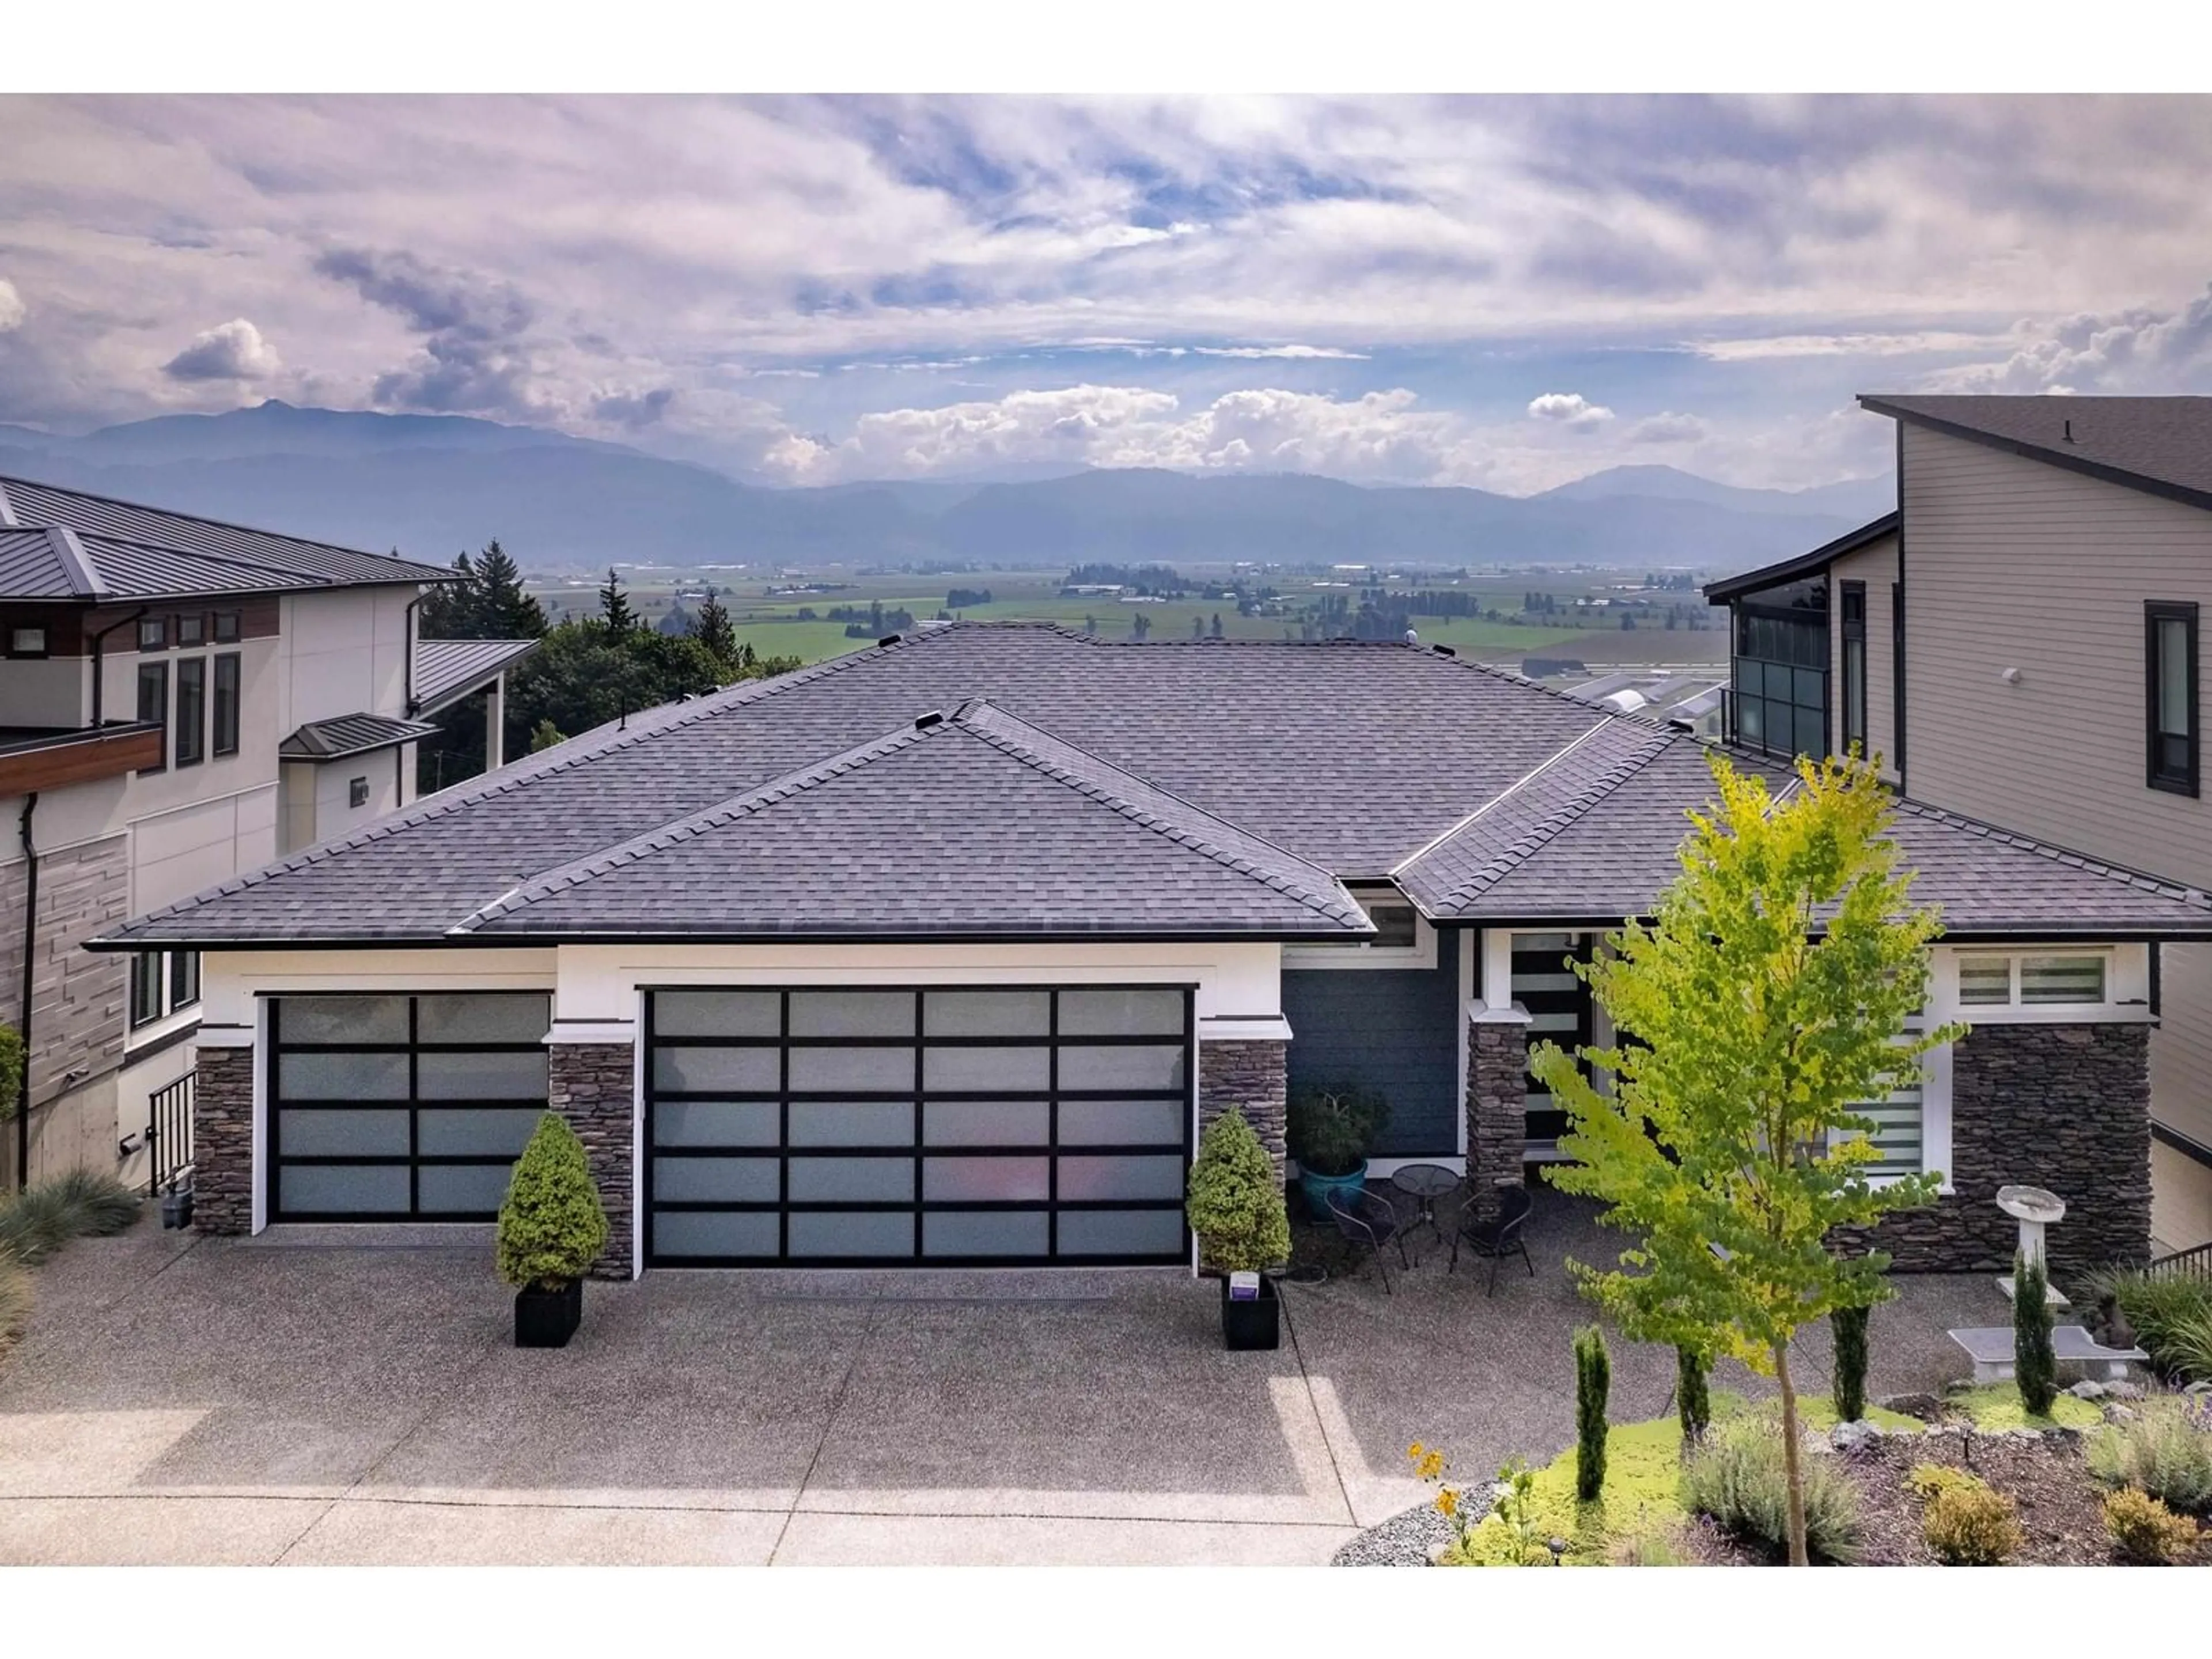 Frontside or backside of a home for 36460 EPWORTH COURT, Abbotsford British Columbia V3G0B2